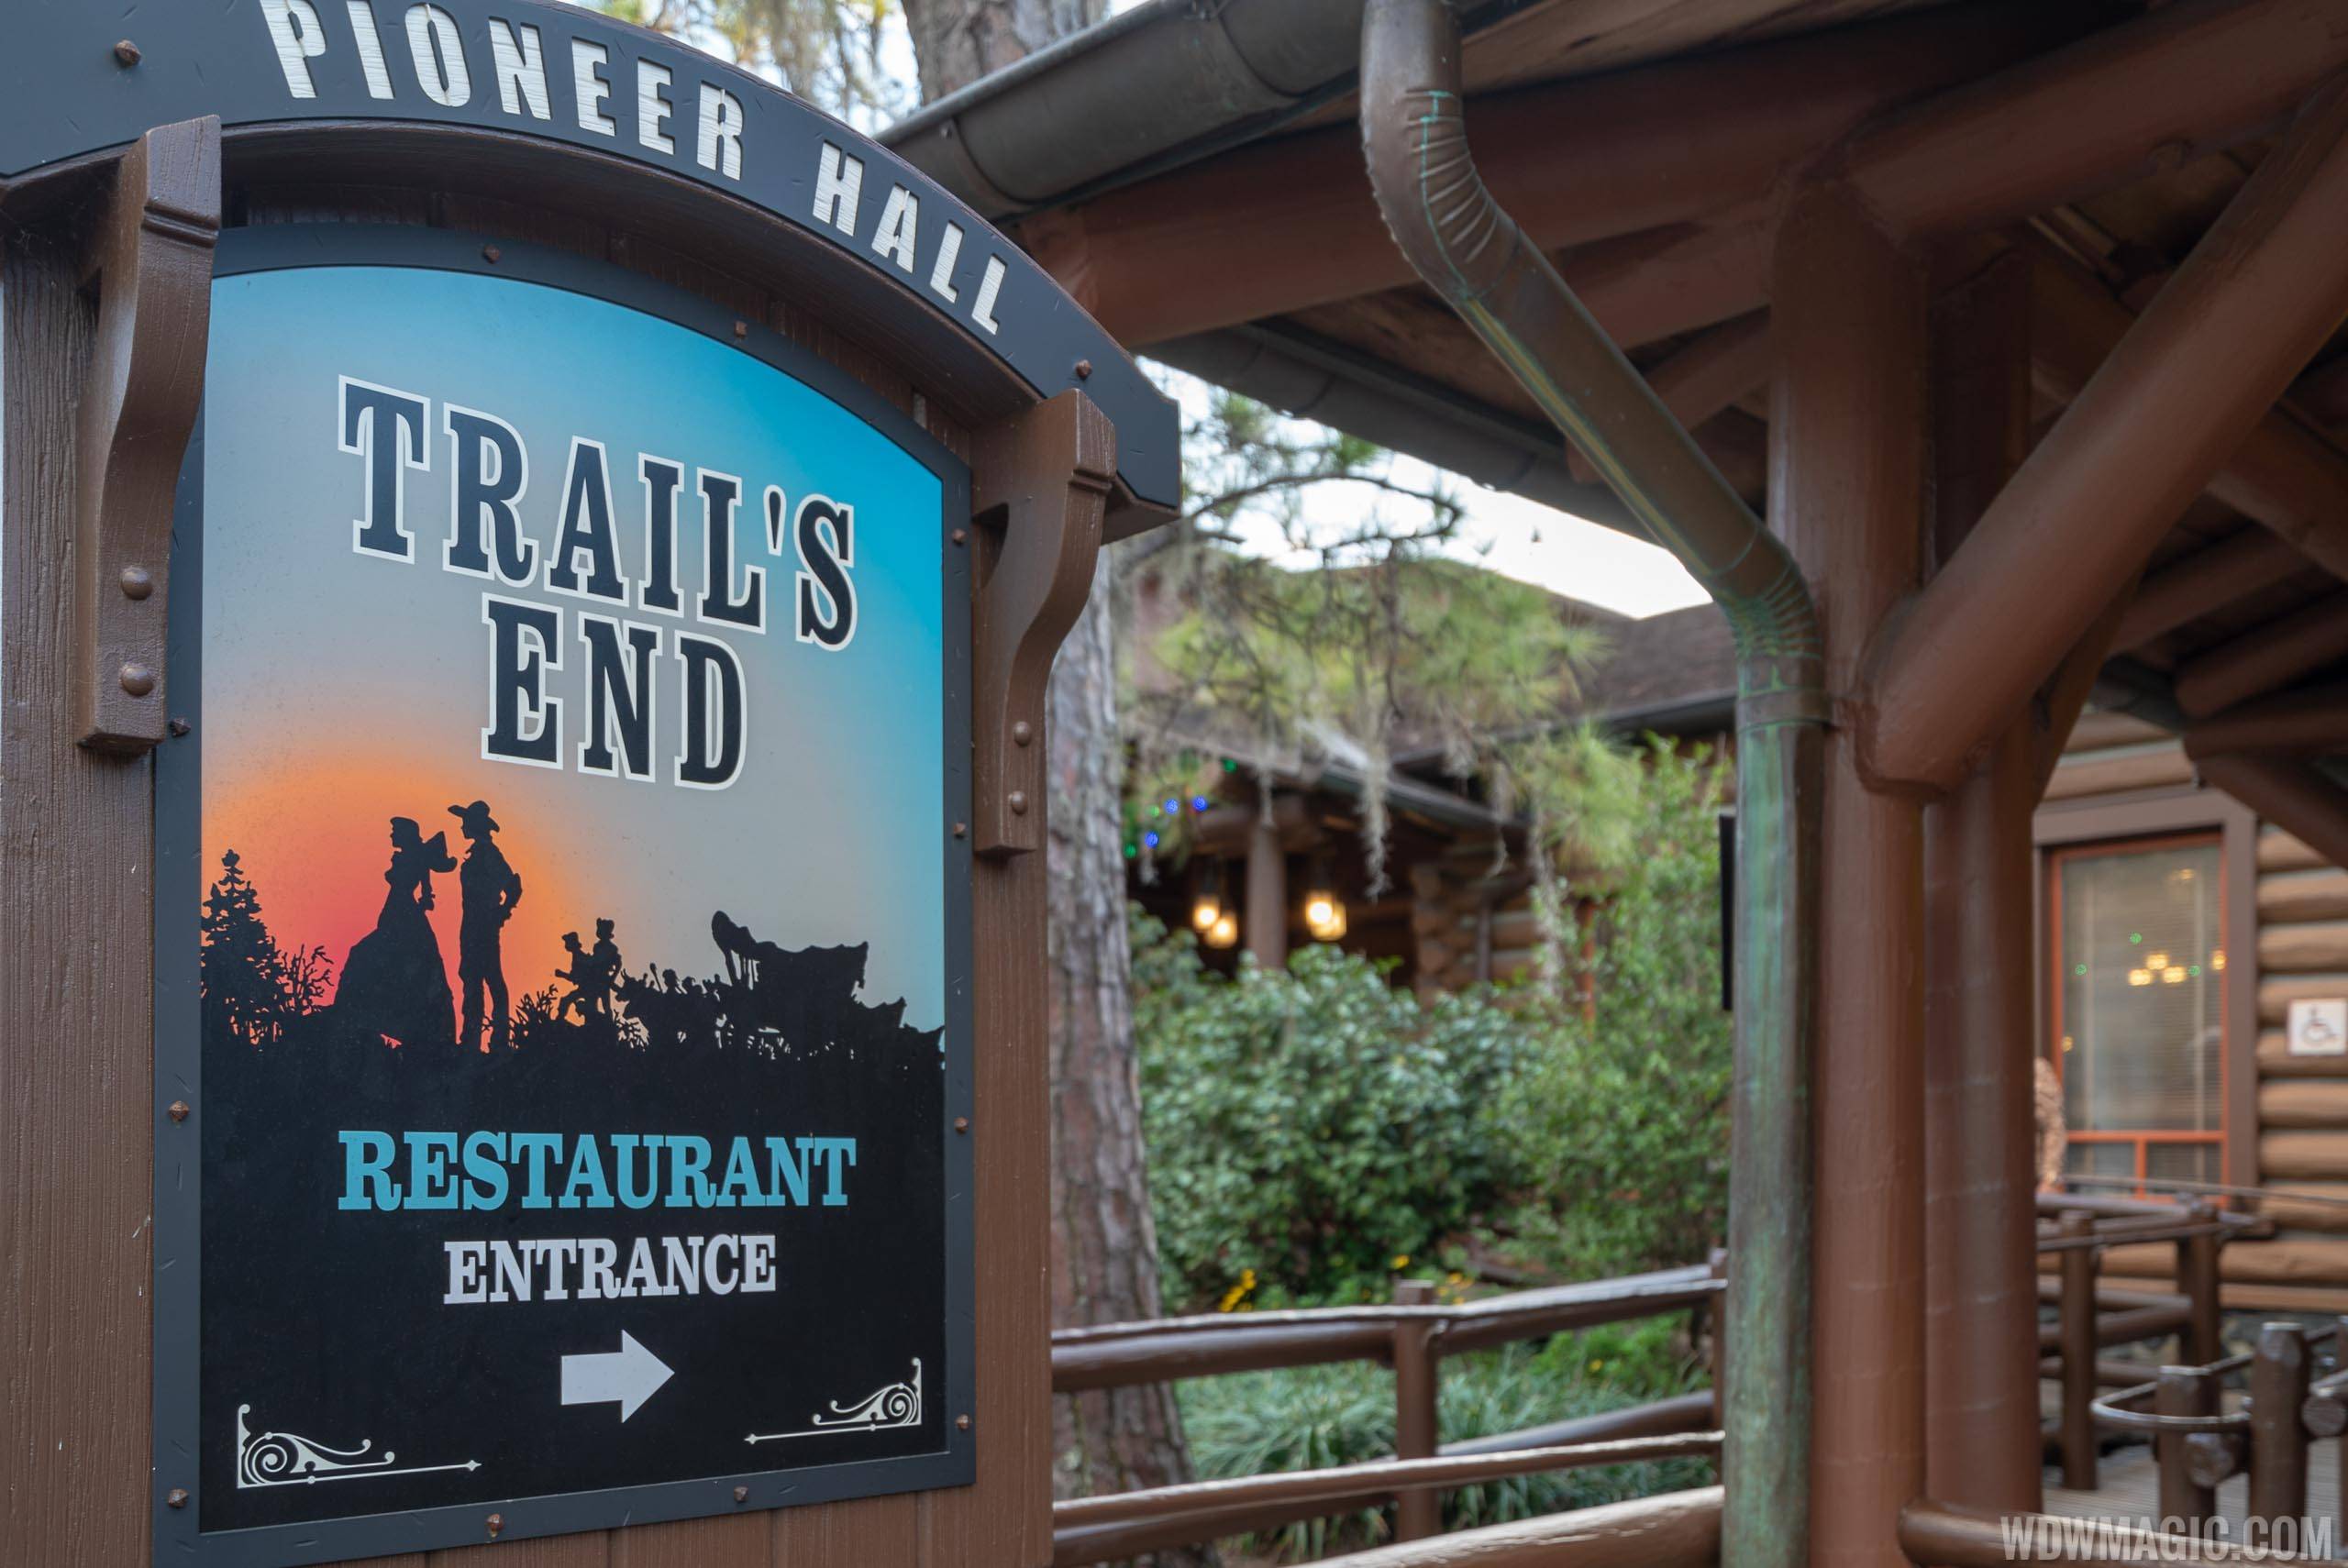 Trail's End Restaurant at Disney's Fort Wilderness now closed and will reopen this summer